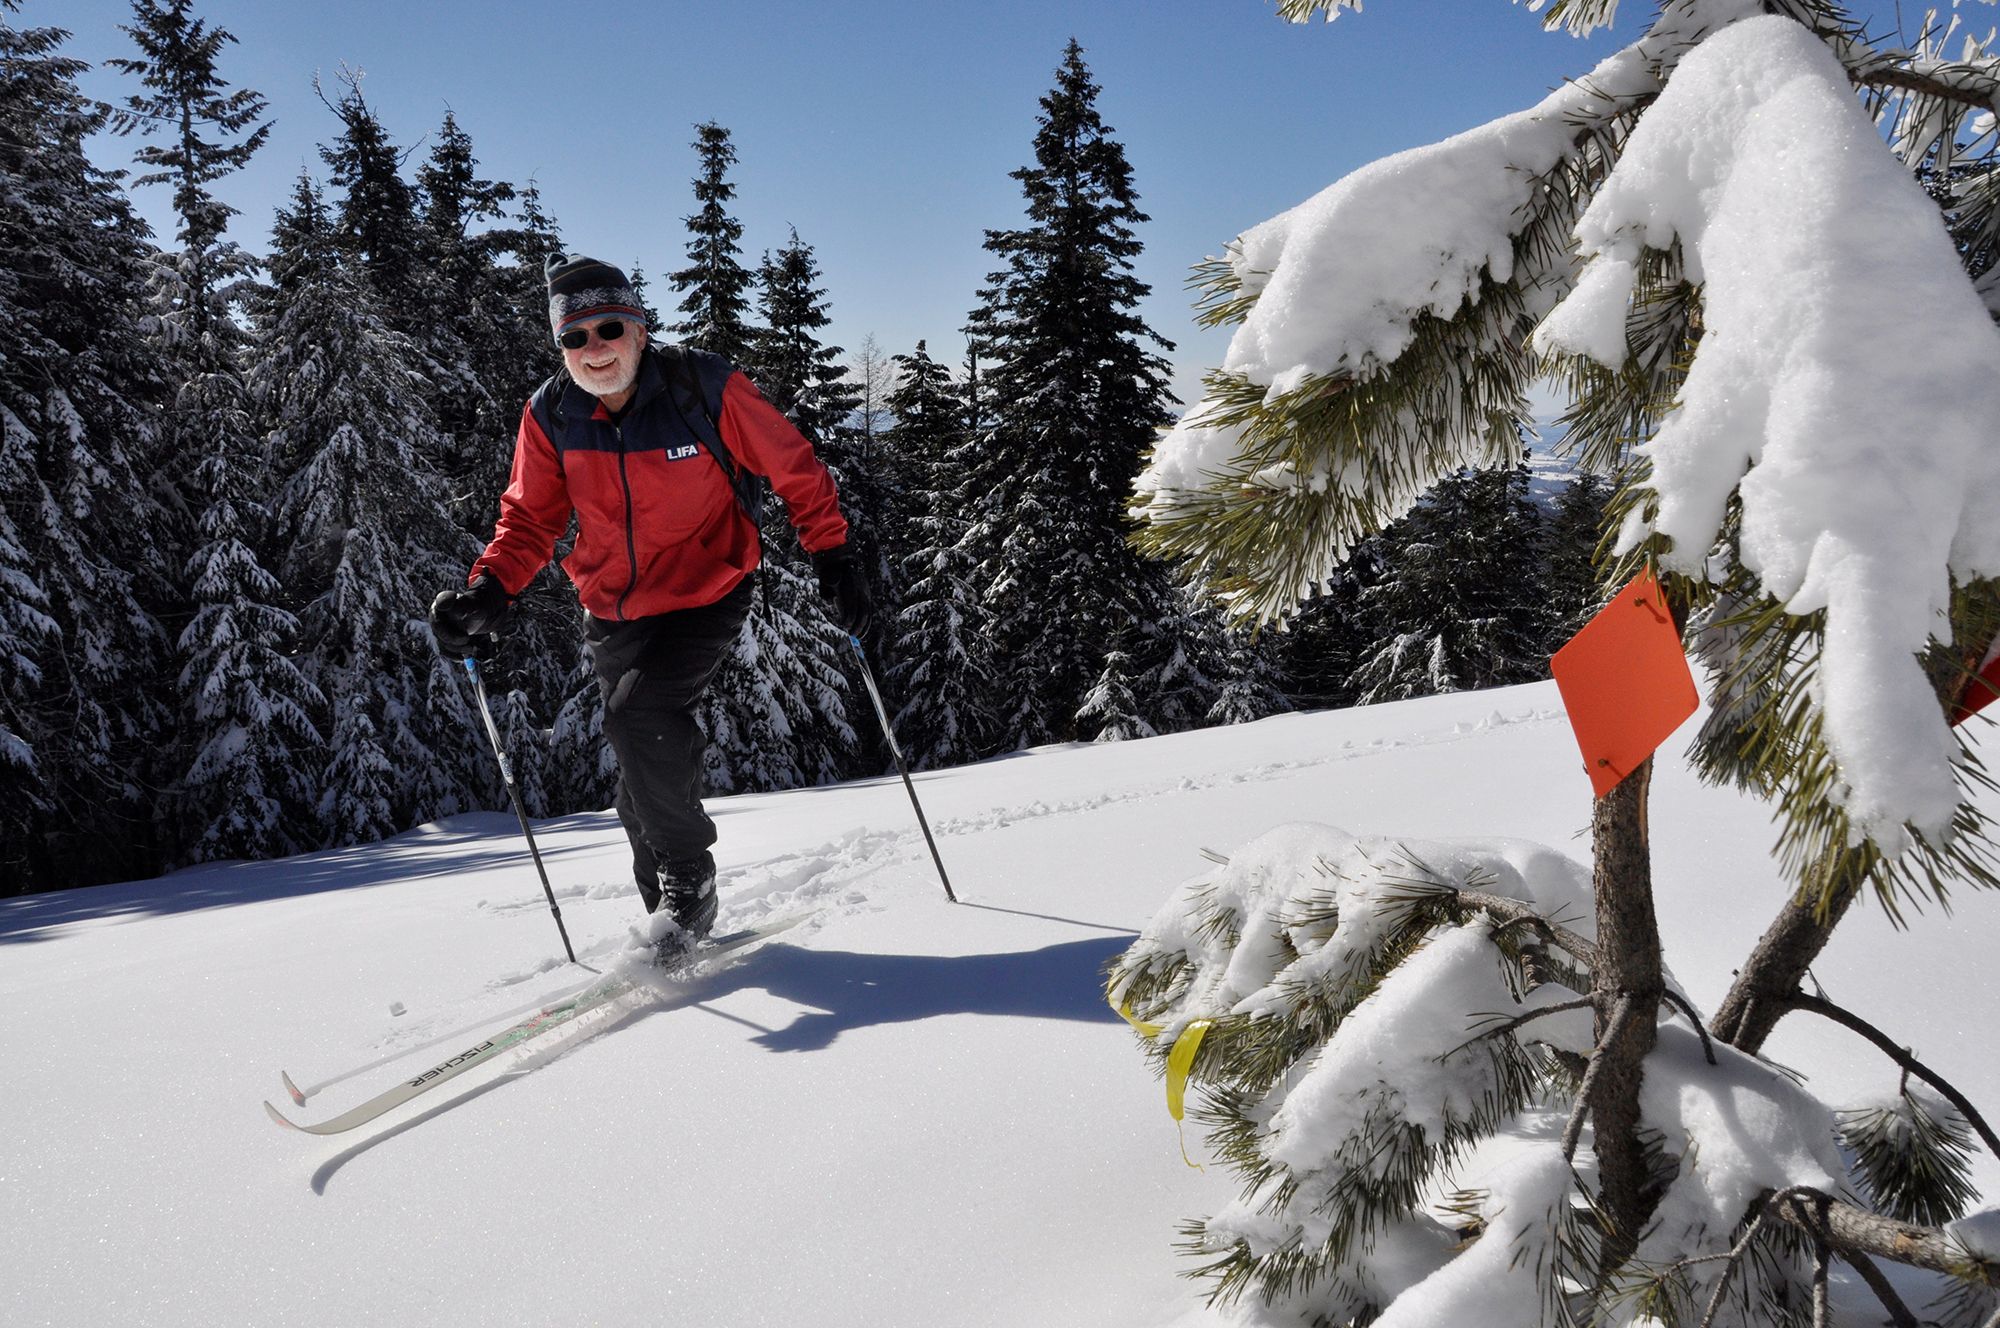 Art Bookstrom, 75, breaks trail on a cross-country skiing route he marked with orange triangles for the enjoyment of skiers who want an old-fashioned nordic skiing experience off the wide, groomed trails at Mount Spokane State Park.